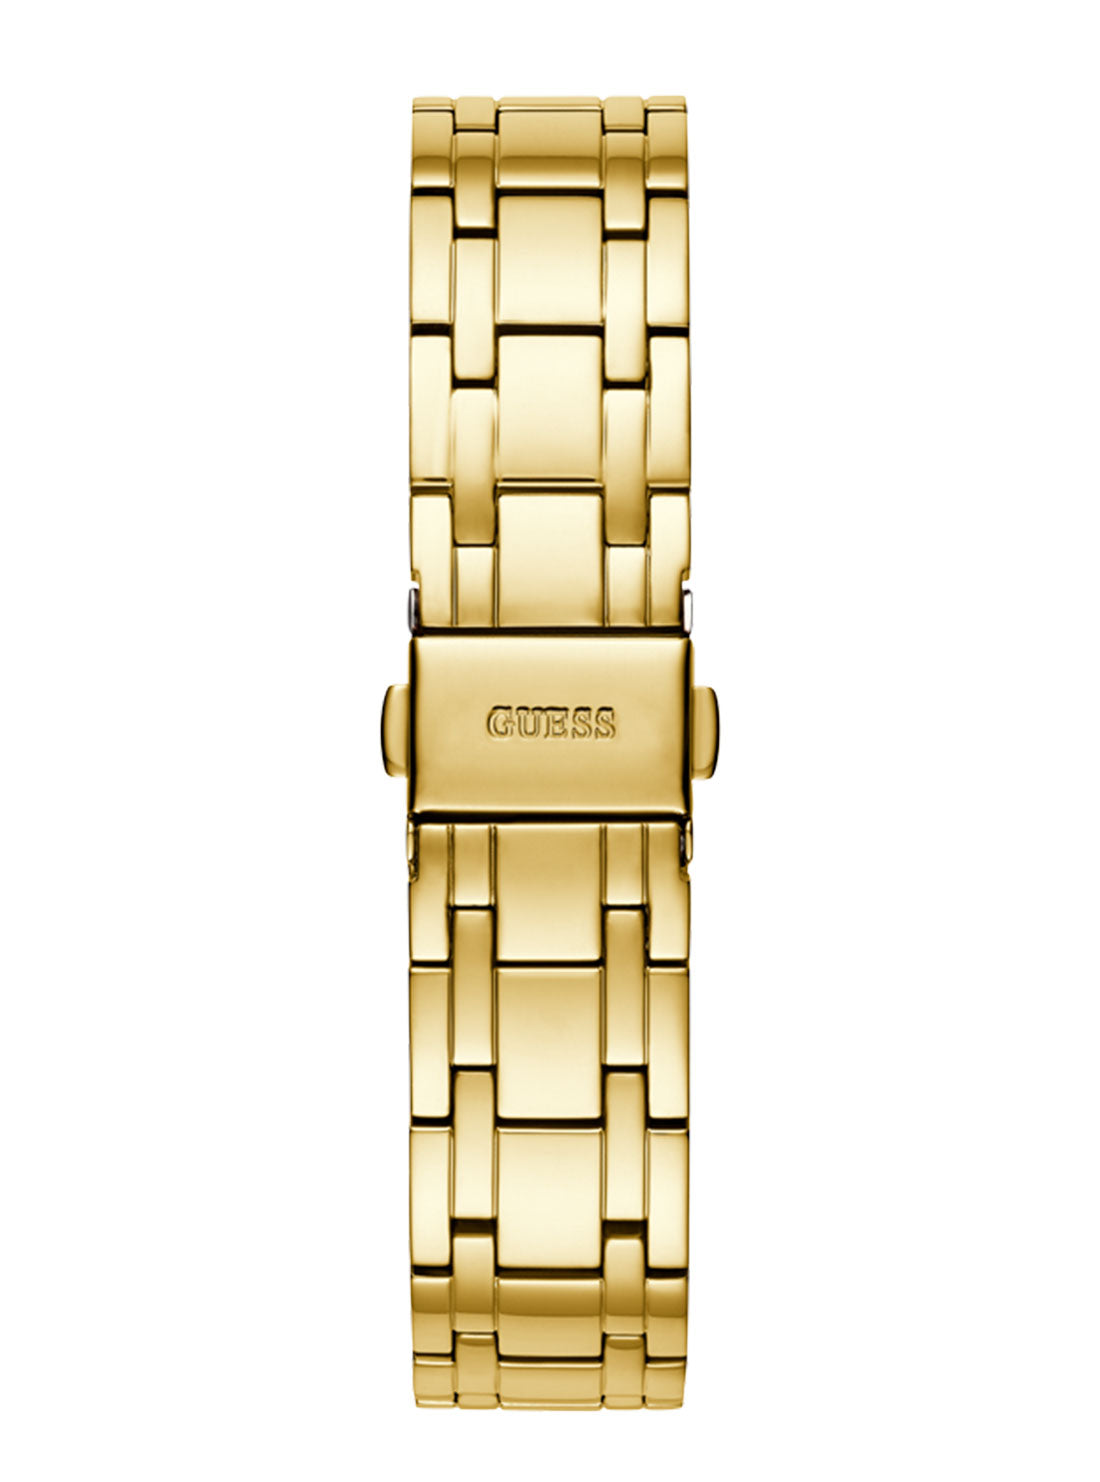 GUESS Women's Gold Cosmo Green Crystal Watch GW0033L8 Back View